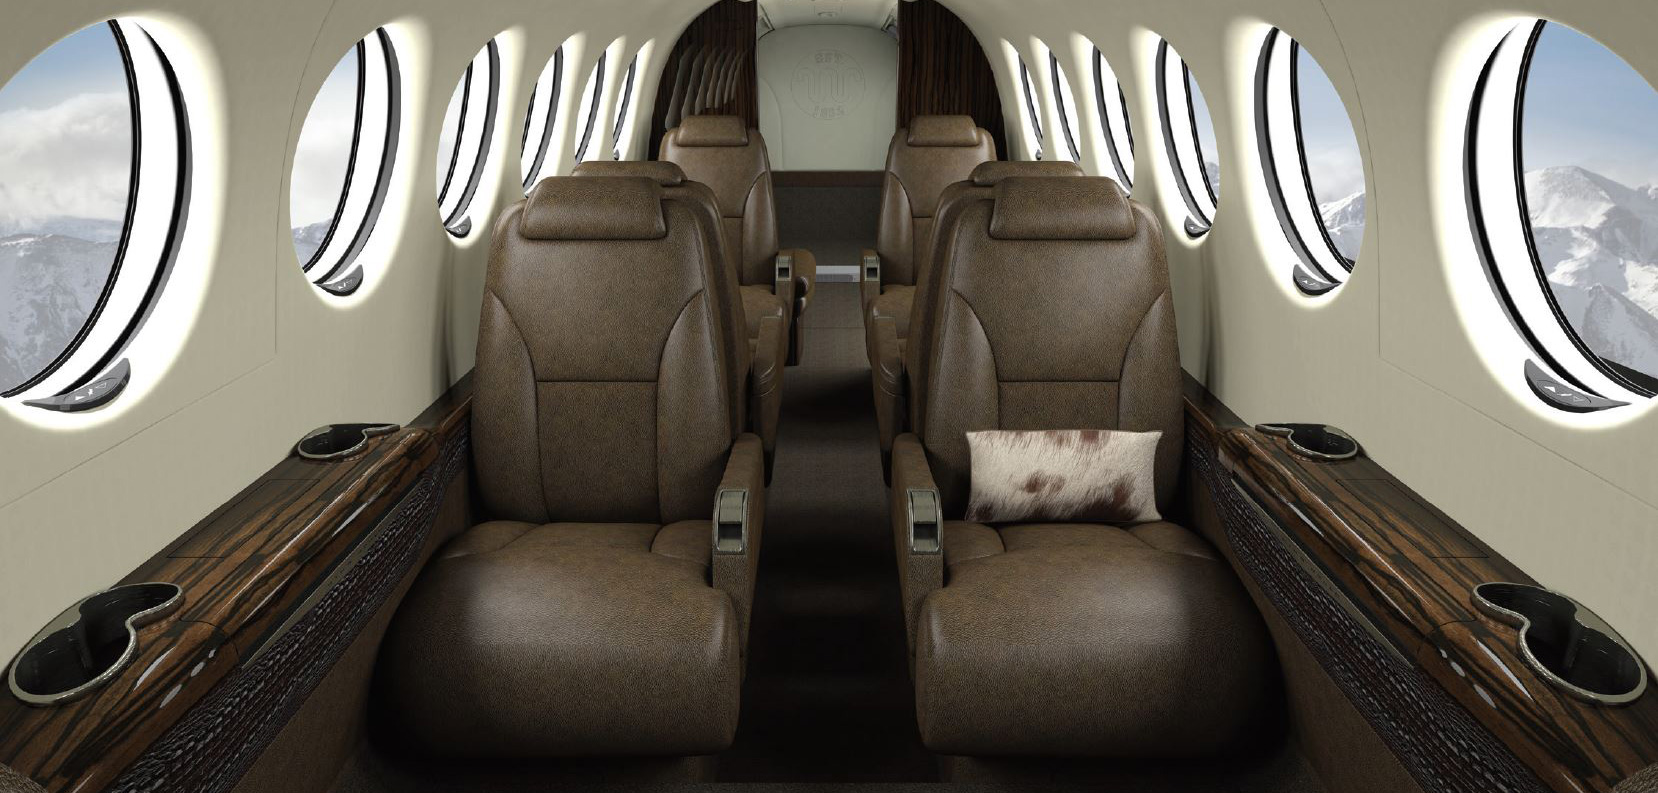 King Ranch Inspires Special Edition King Air 350i Business